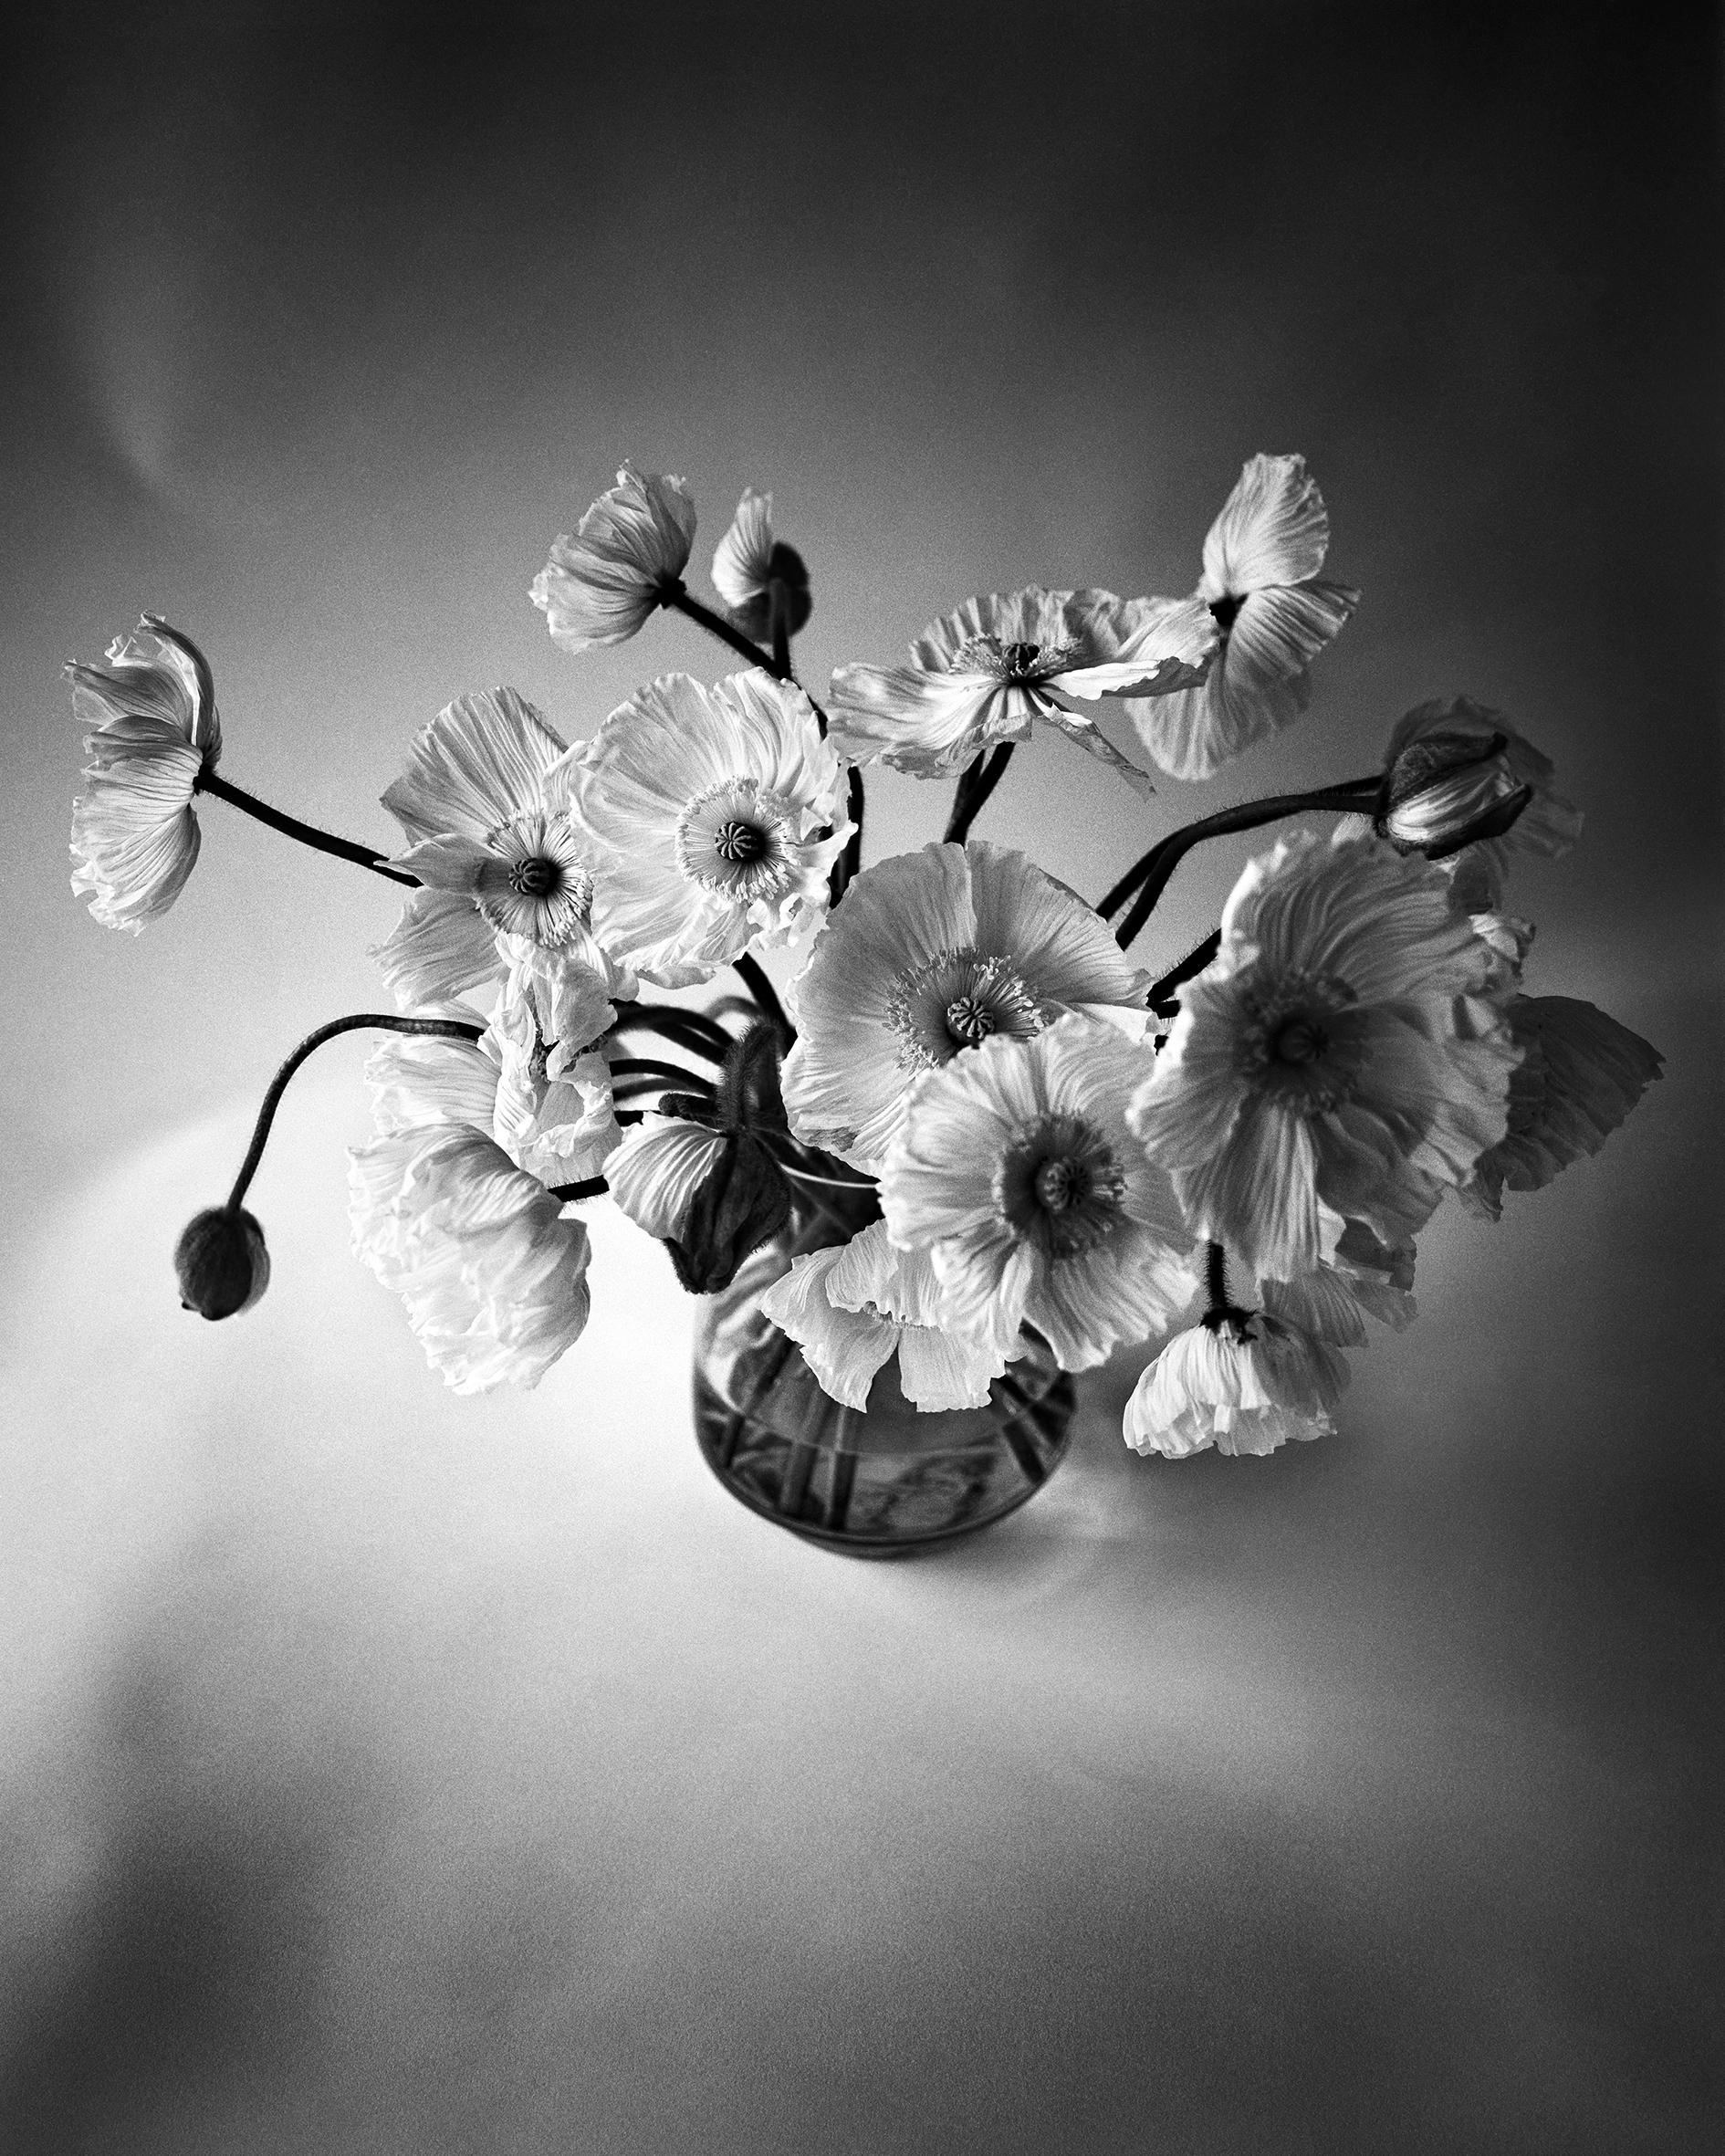 Ugne Pouwell Black and White Photograph - Poppy Bunch - Black and White analogue floral photography, Limited edition of 20